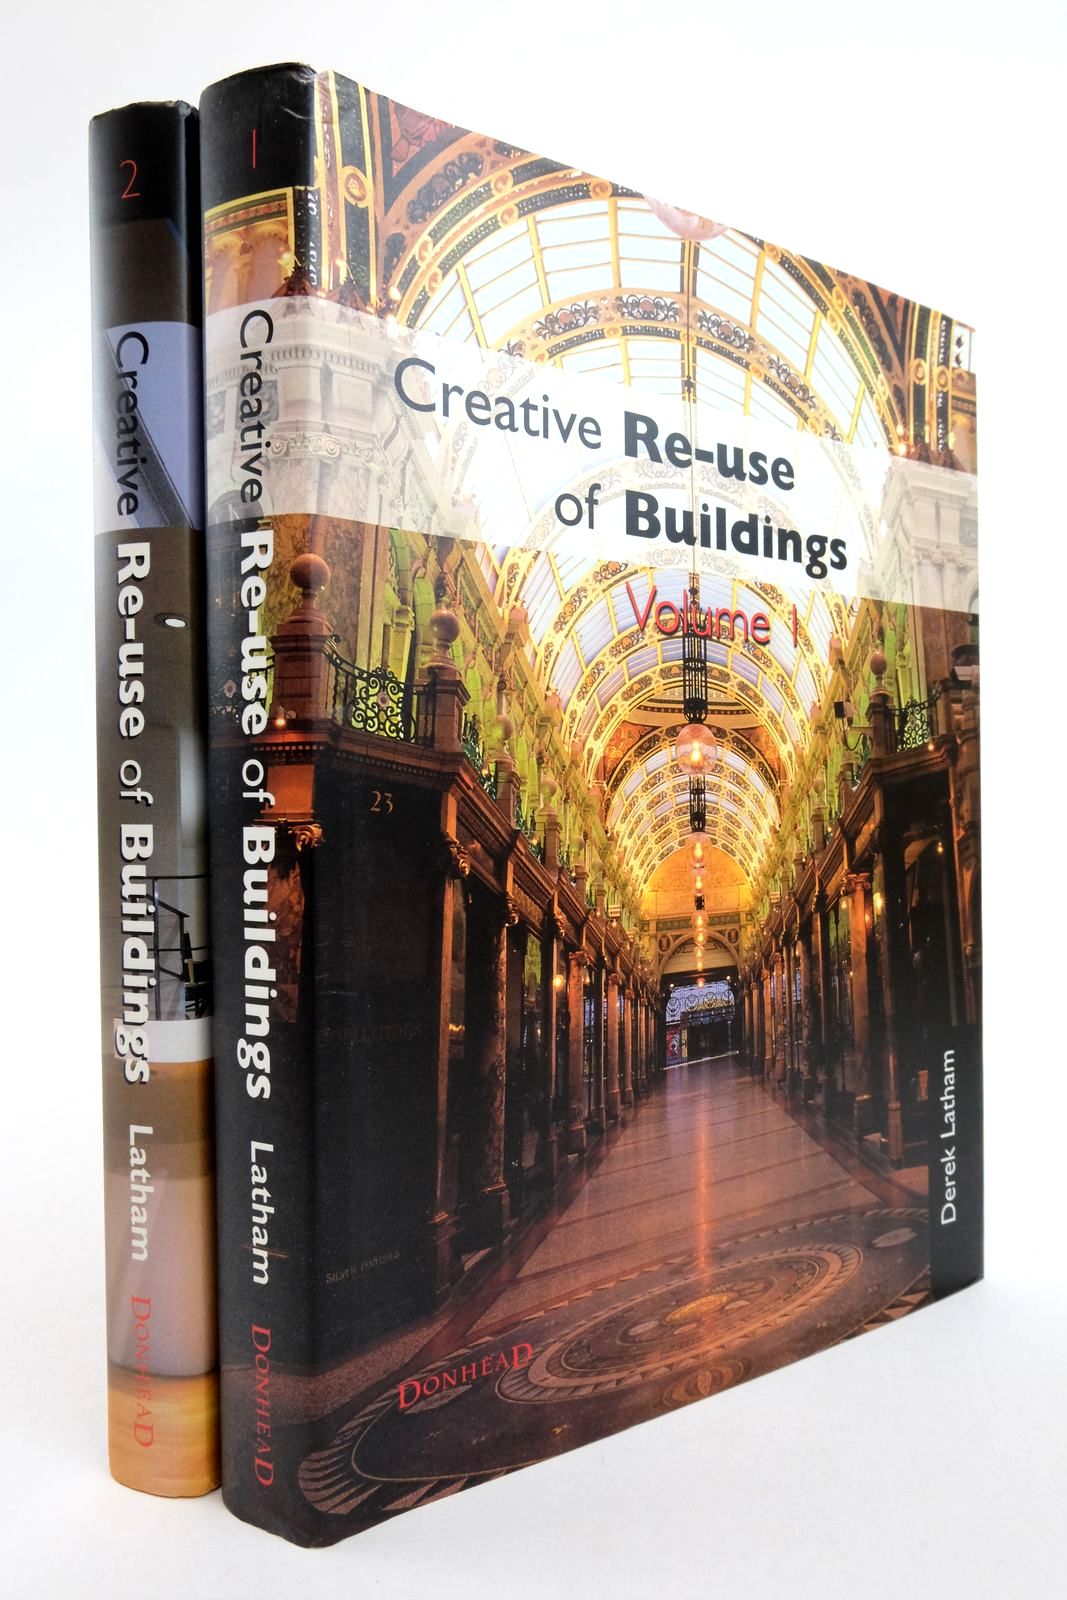 Photo of CREATIVE RE-USE OF BUILDINGS (2 VOLUMES) written by Latham, Derek published by Donhead (STOCK CODE: 2136644)  for sale by Stella & Rose's Books